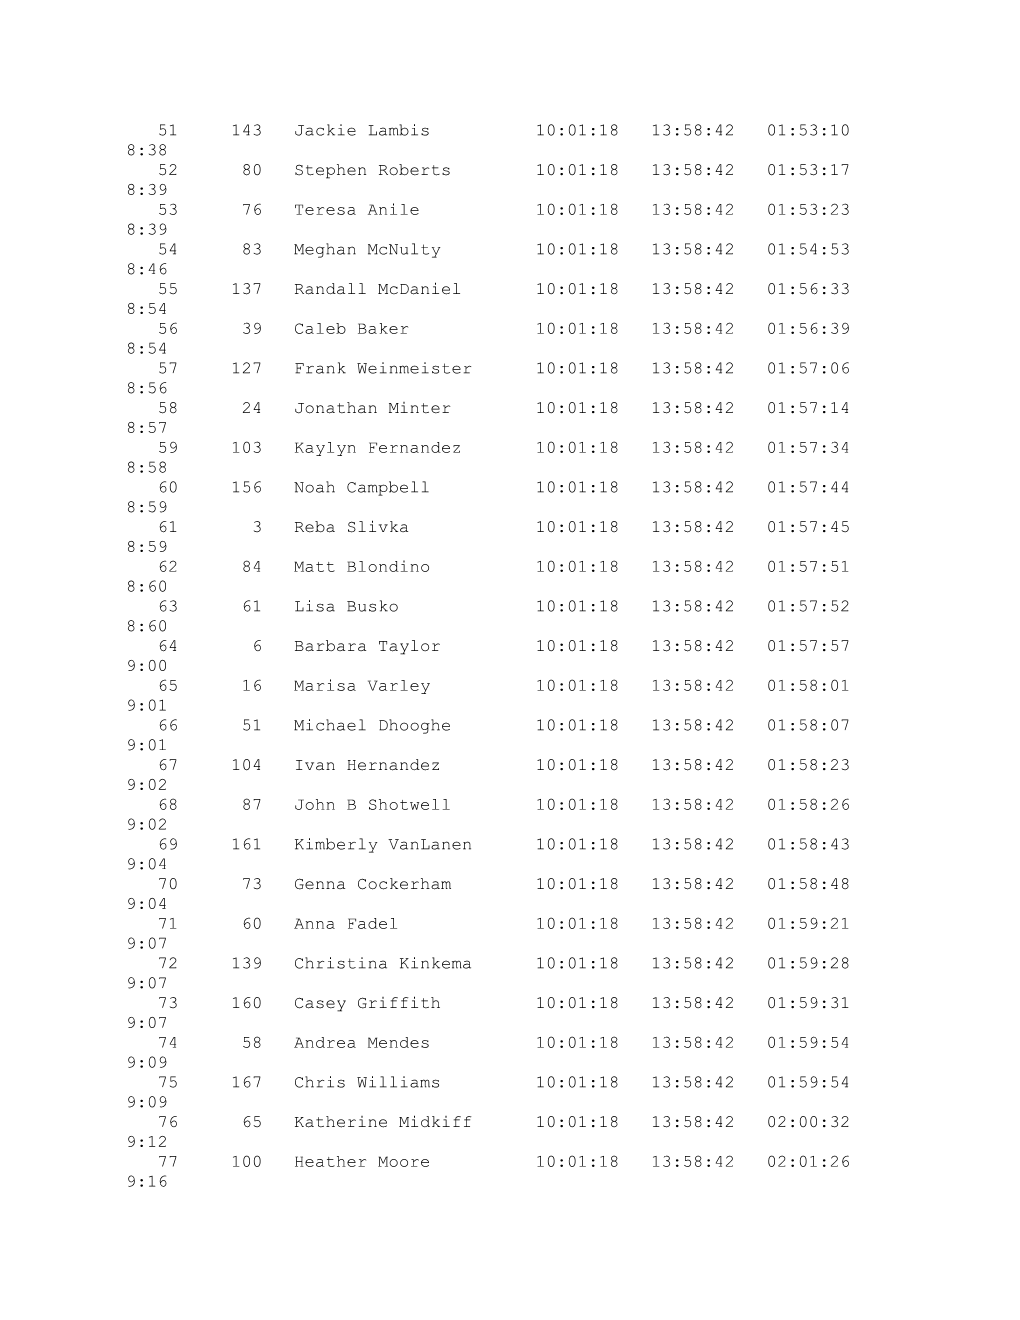 Overall Race Results by Division: Half As of 10/27/2012 1:32:39 PM